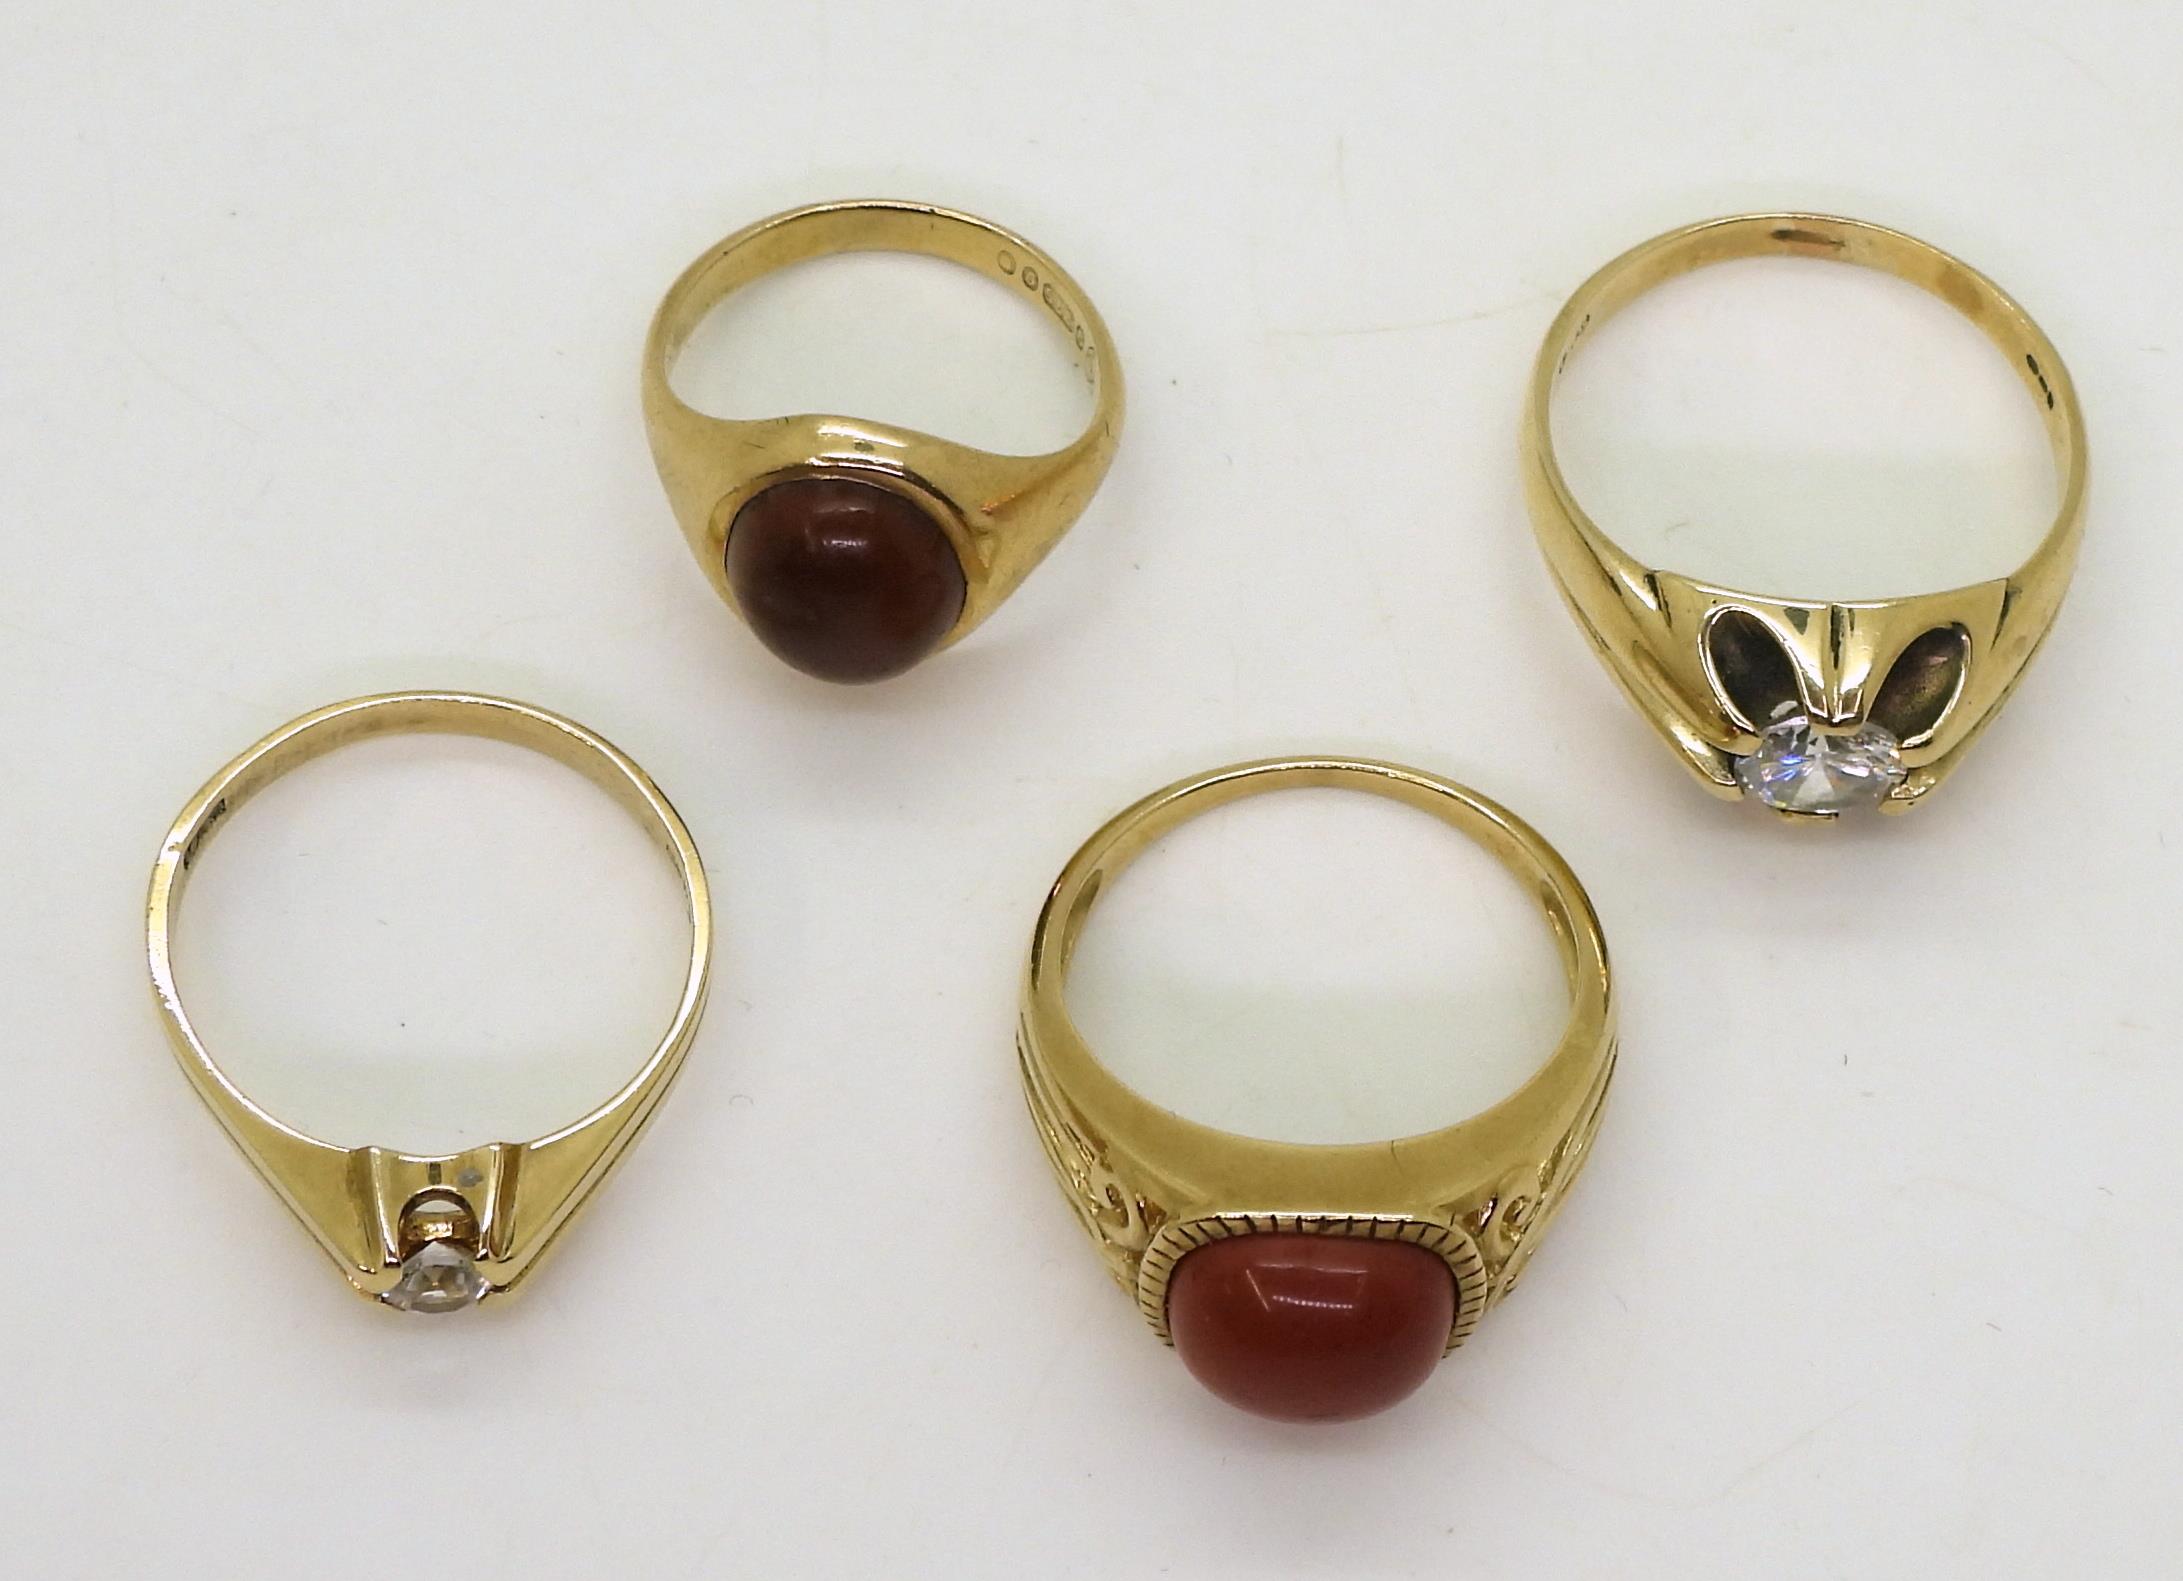 Four 9ct gold rings, large cz gypsy ring Z1/2, smaller example V1/2, red jasper W, brown gemN1/2. - Image 3 of 3